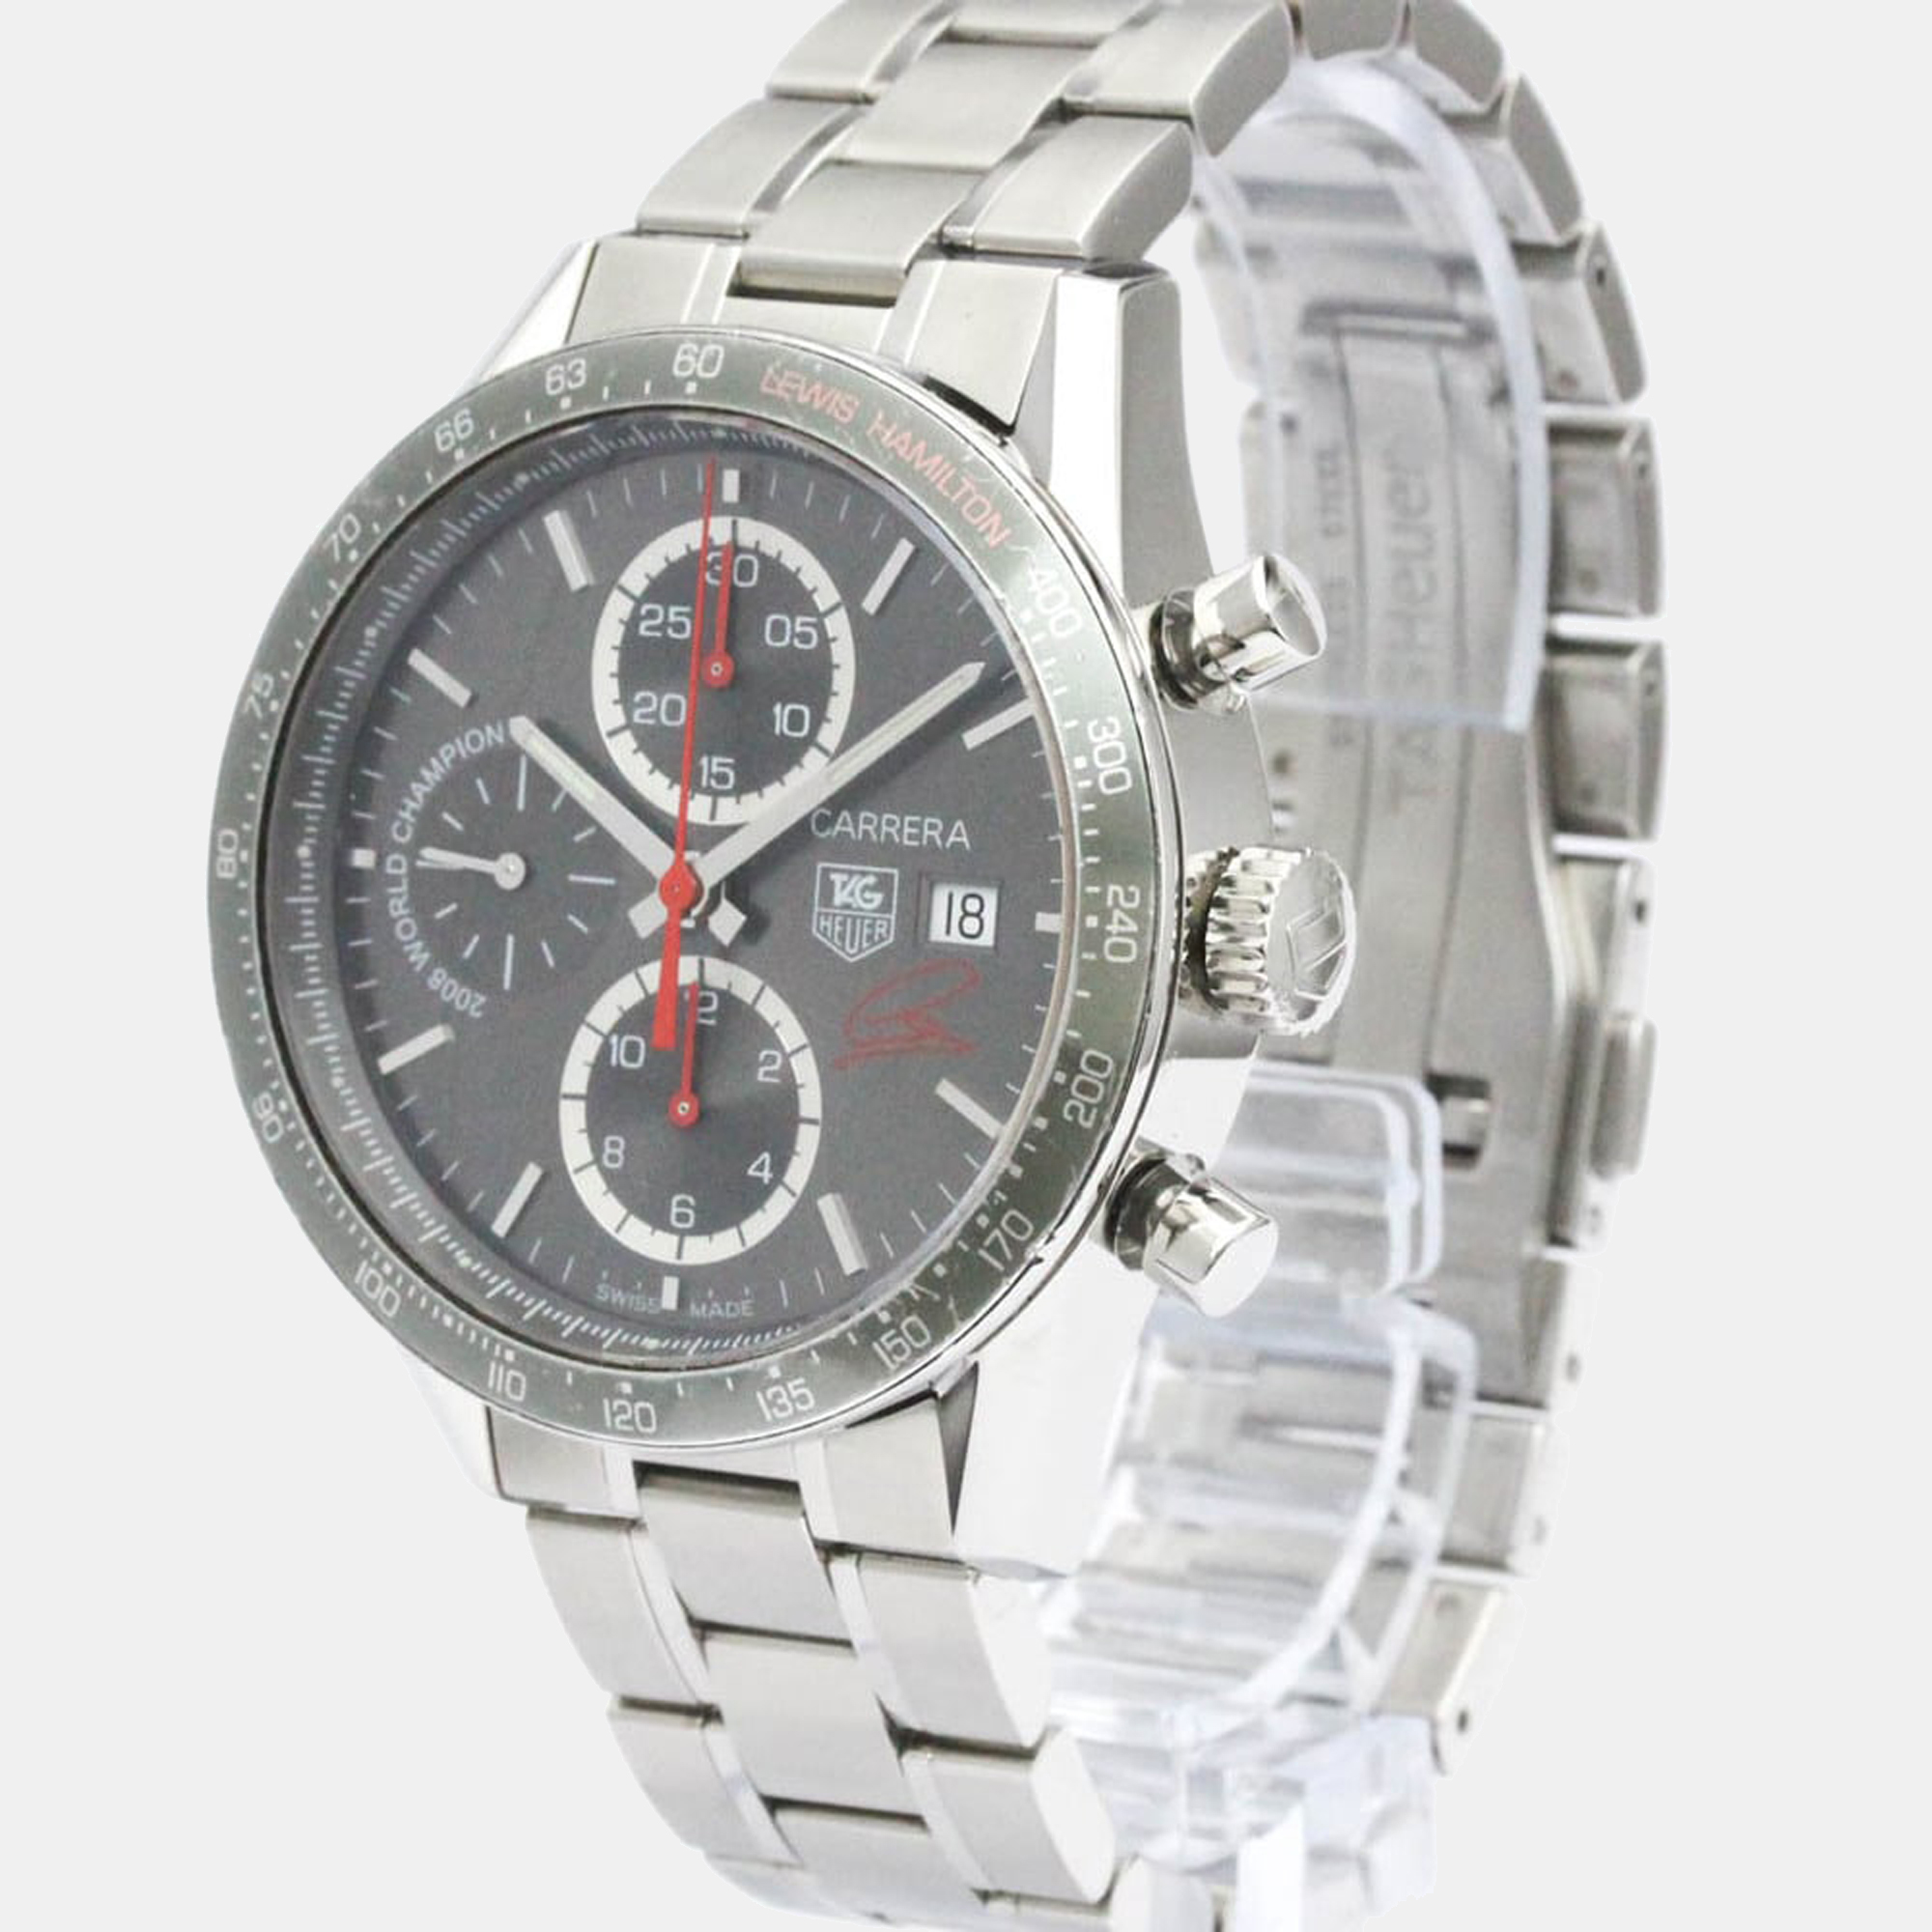 Tag Heuer Grey Stainless Steel Carrera CV201M Automatic Men's Wristwatch 41mm